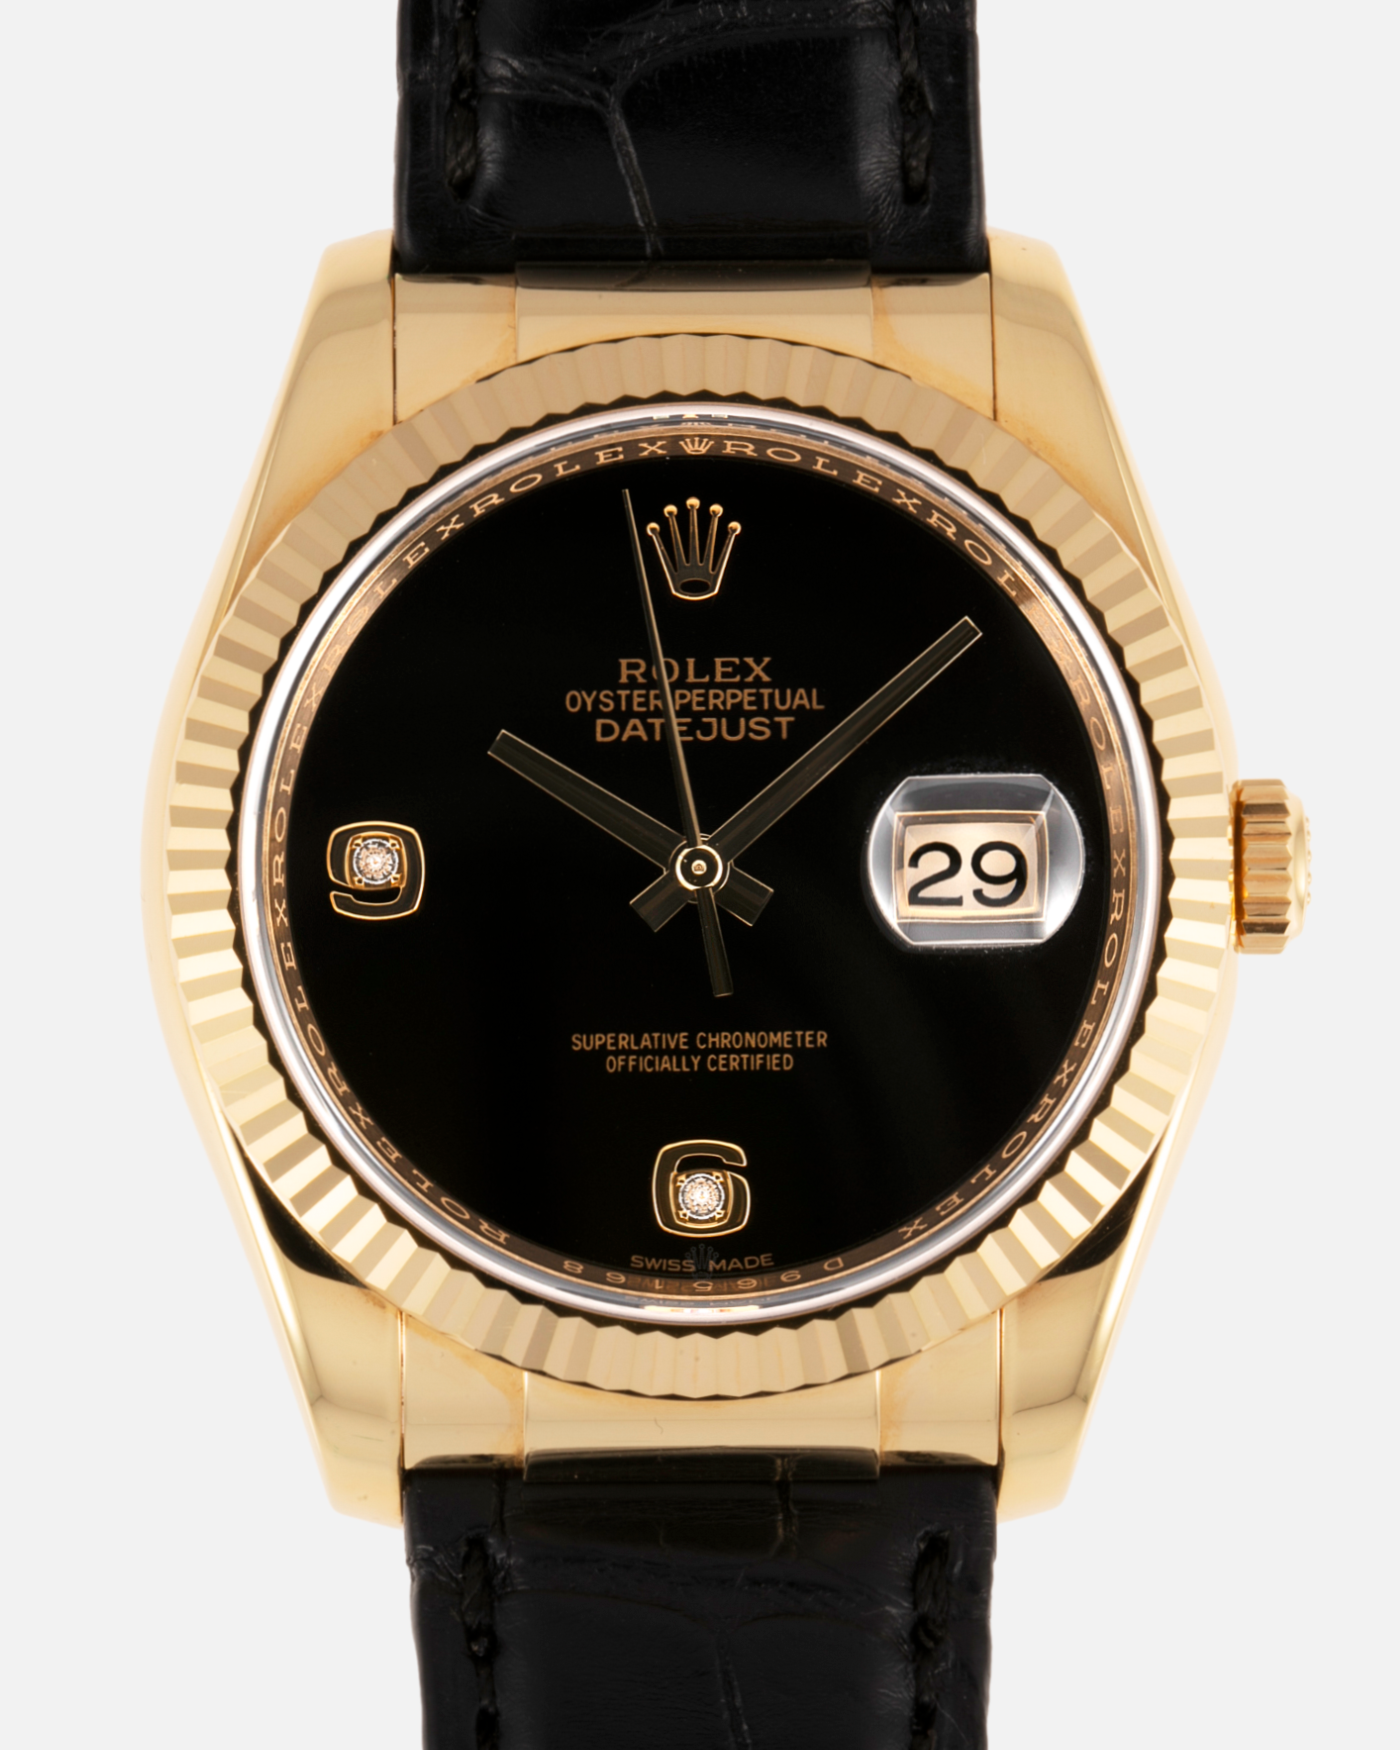 Brand: Rolex Year: 2005 / Sold 2021 Model: Datejust Reference Number: 116238 Material: 18k Yellow Gold Movement: Rolex Cal. 3135 Case Diameter: 36mm Bracelet: Rolex Black Alligator with 18k Yellow Gold Rolex Clasp